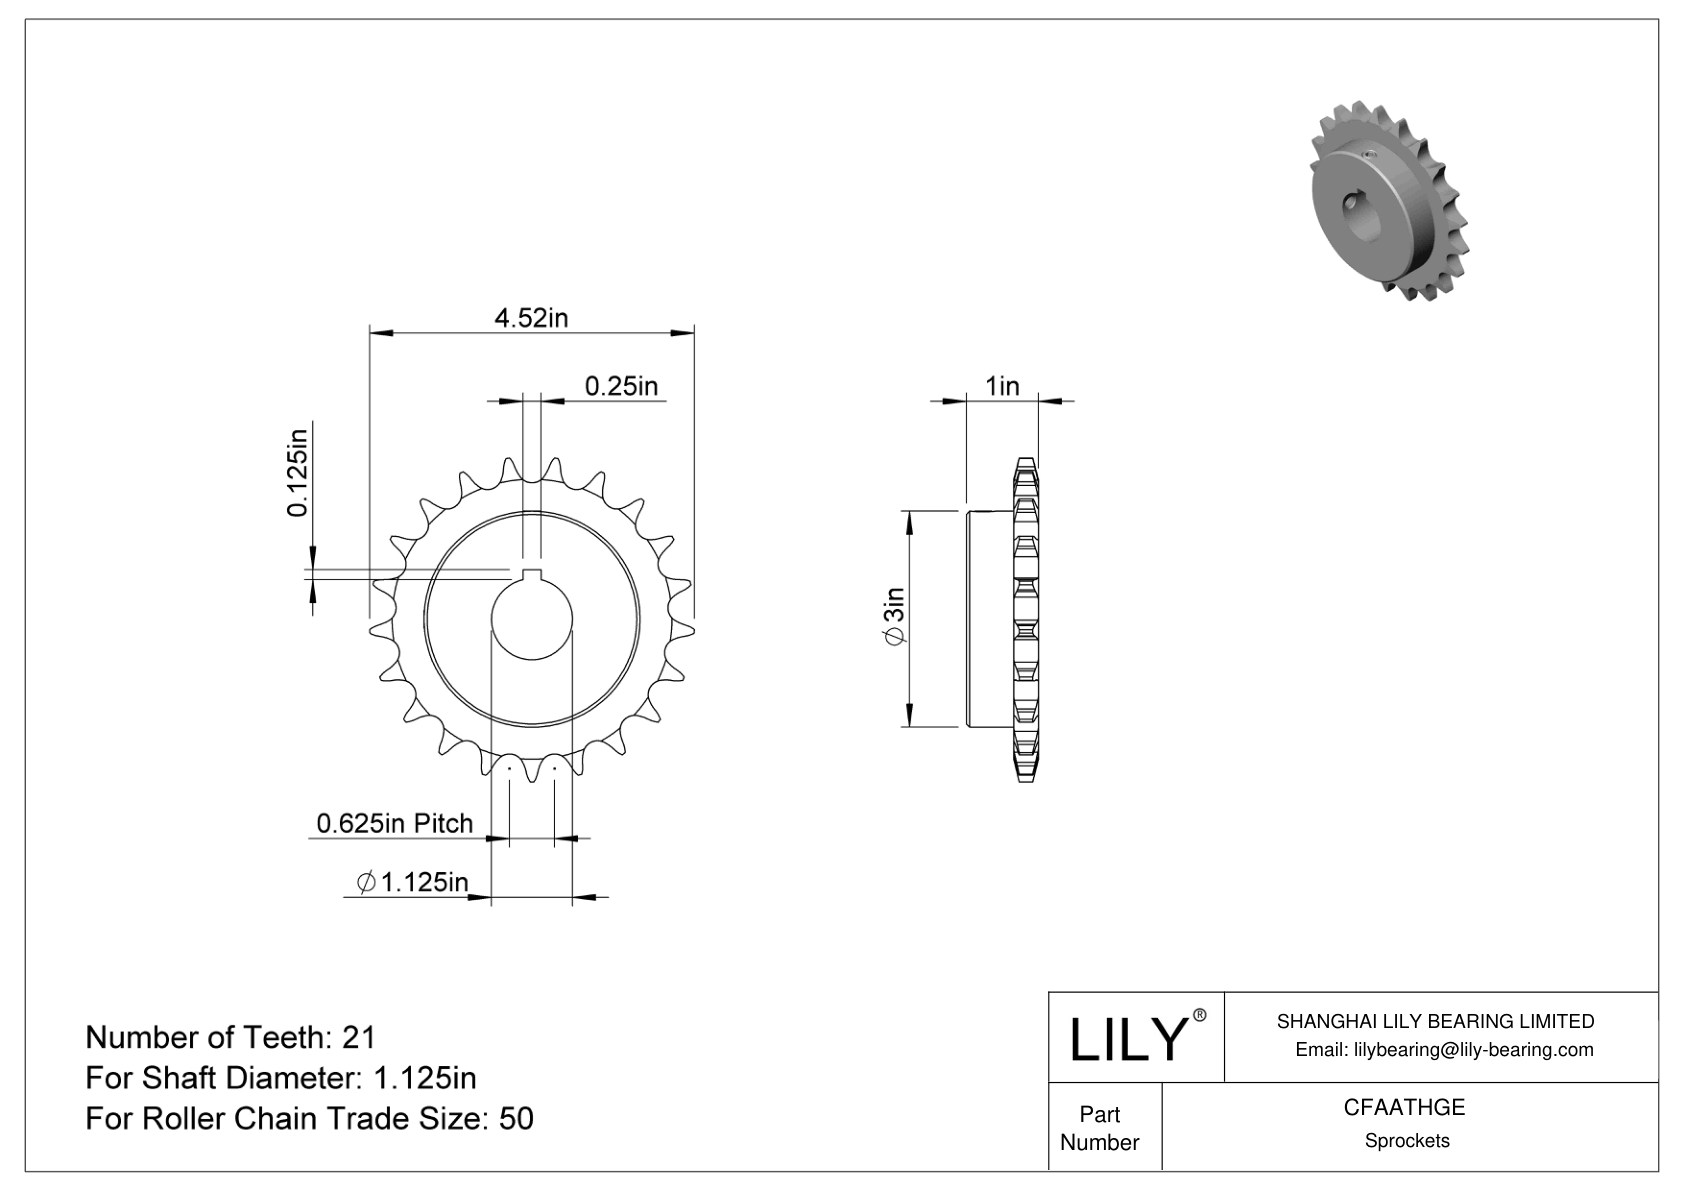 CFAATHGE Wear-Resistant Sprockets for ANSI Roller Chain cad drawing